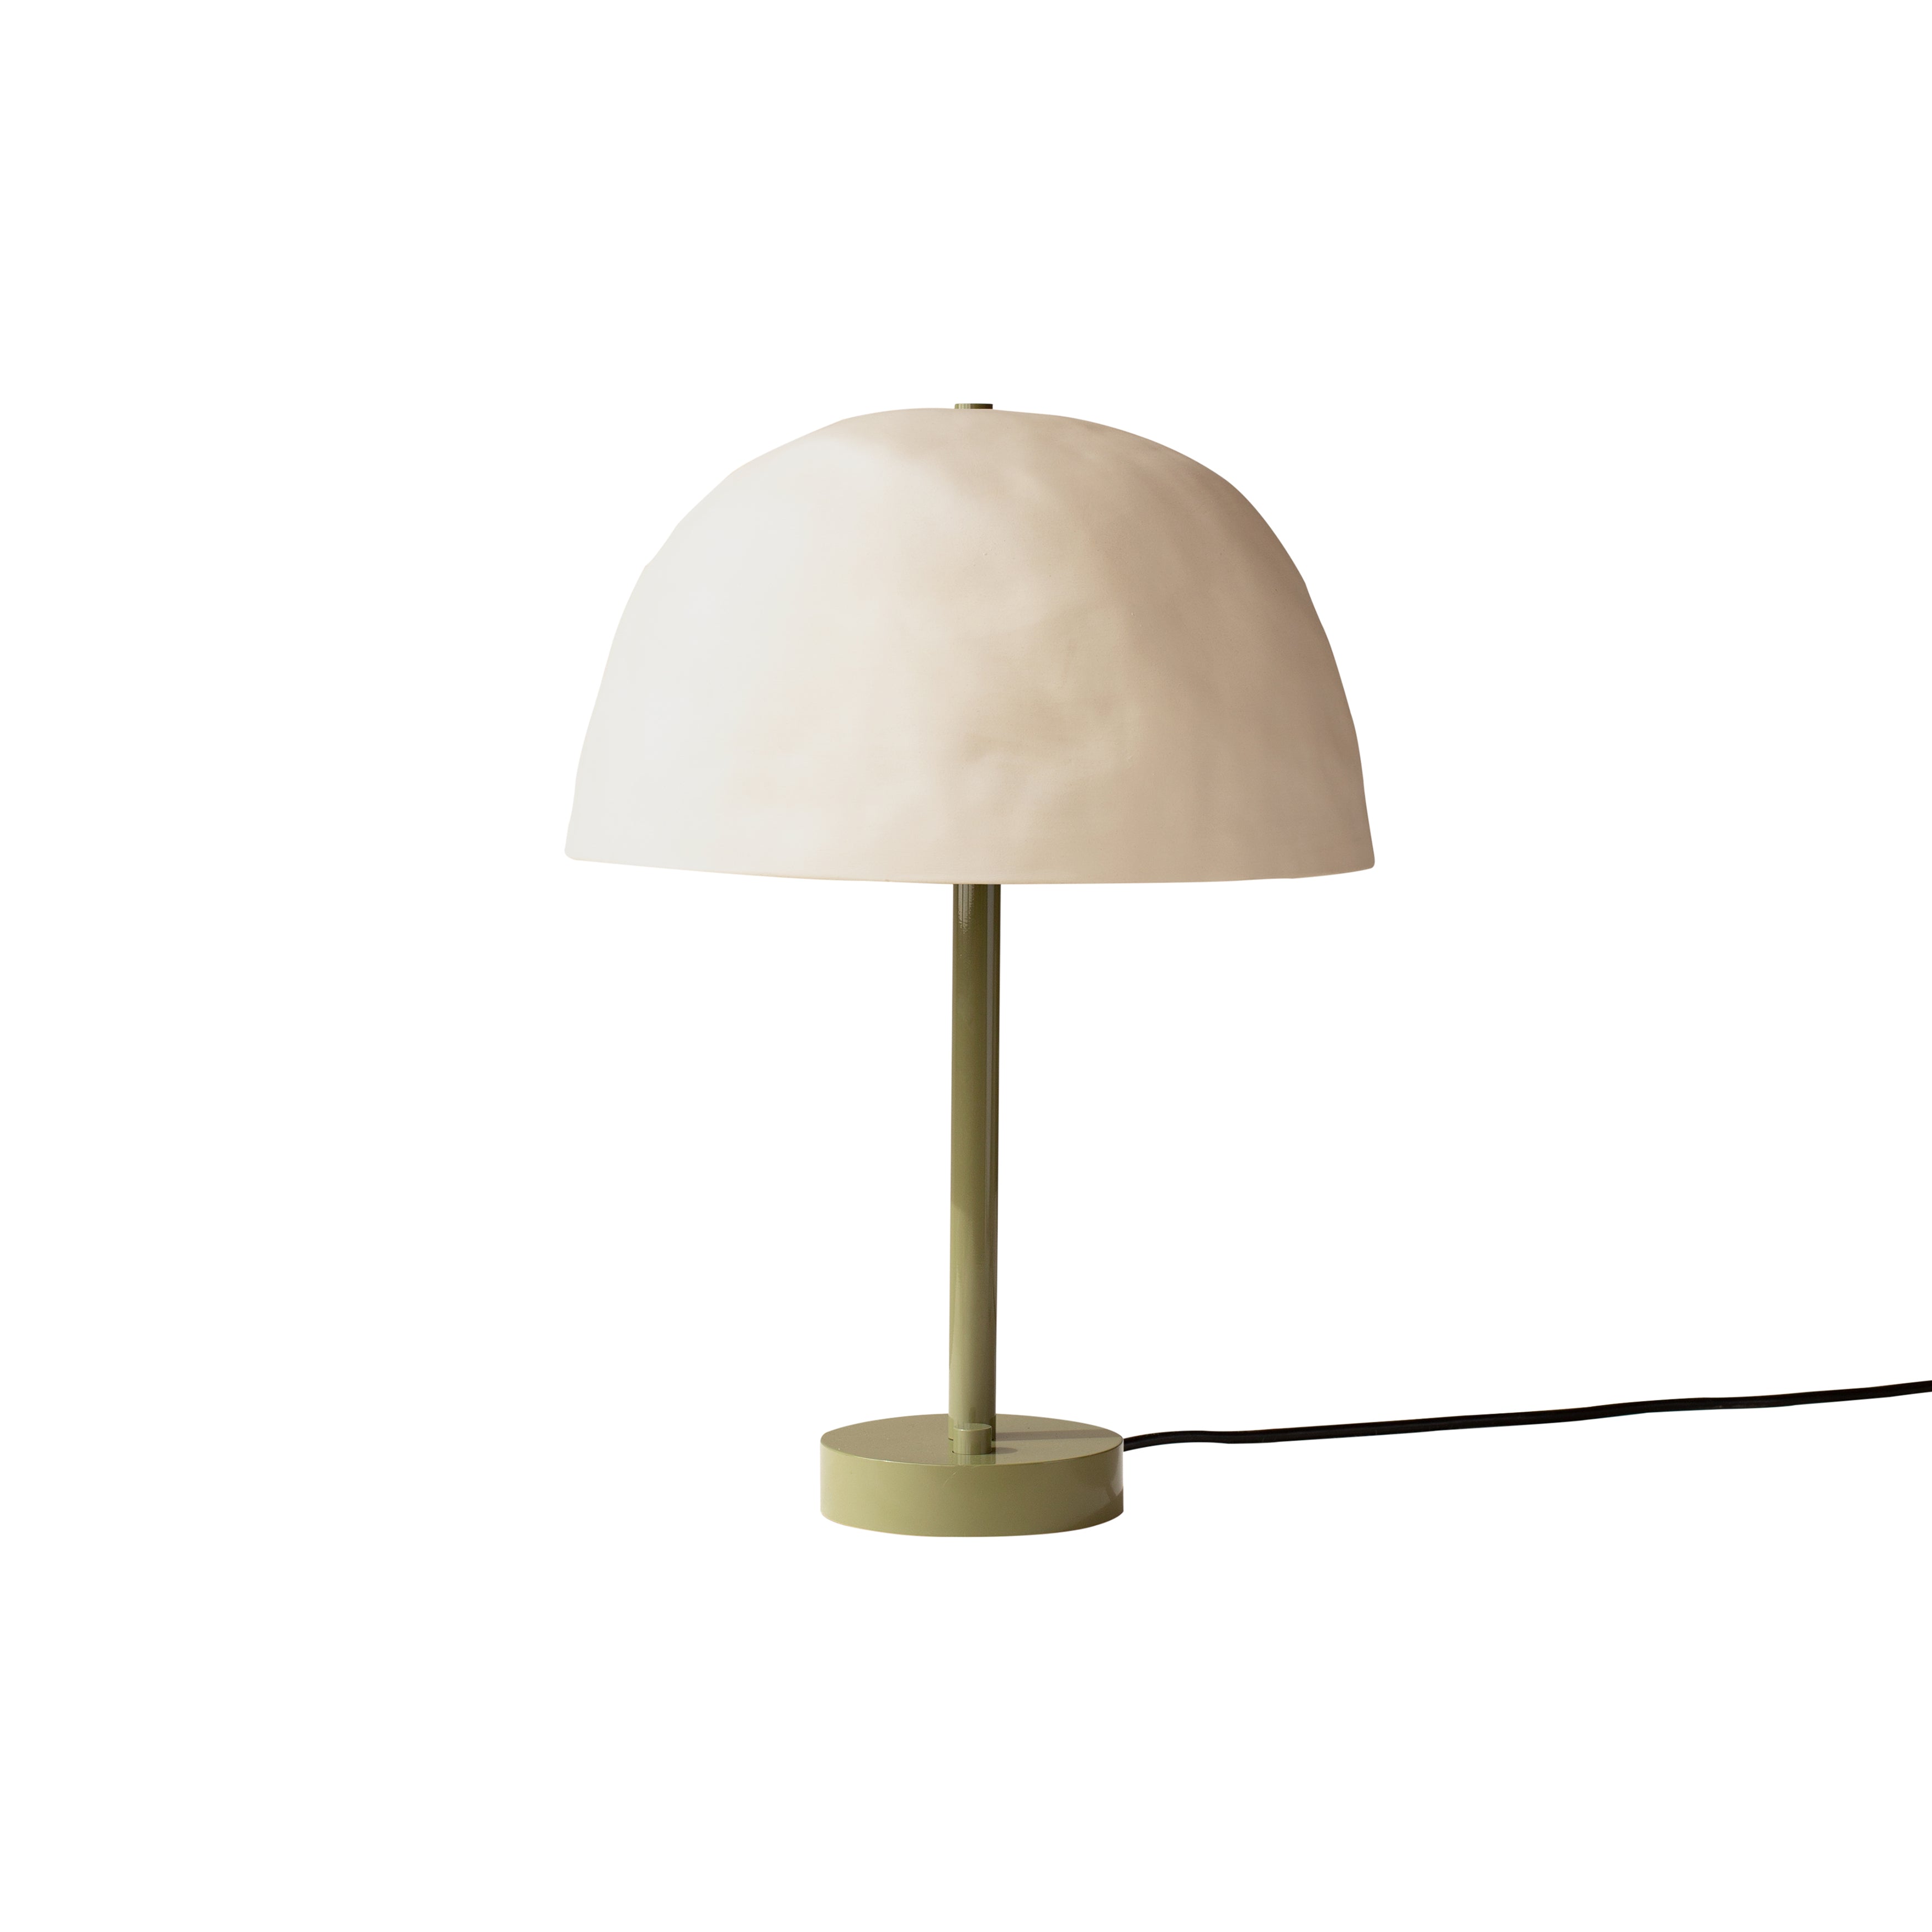 Dome Table Lamp: White Clay + Reed Green